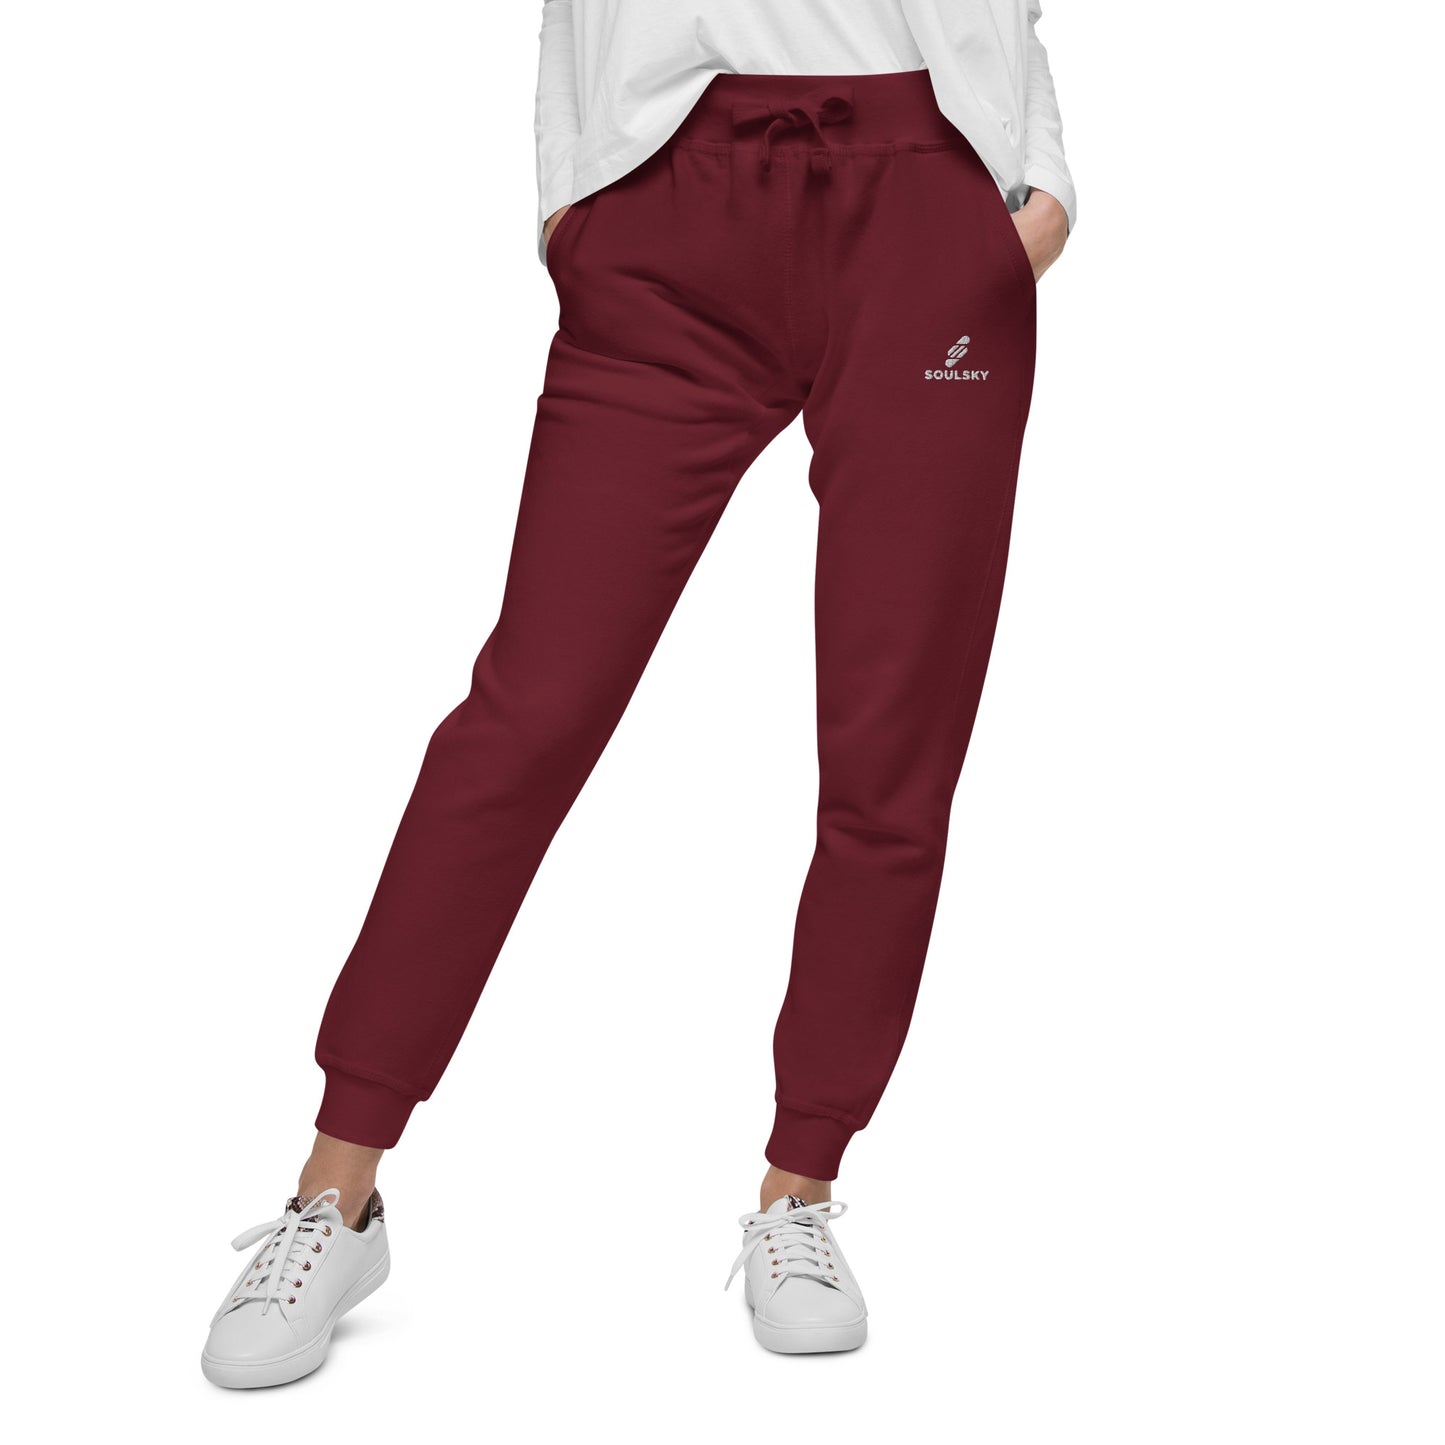 Female model wearing maroon unisex joggers with white embroidered logo on left thigh that says "SOULSKY".